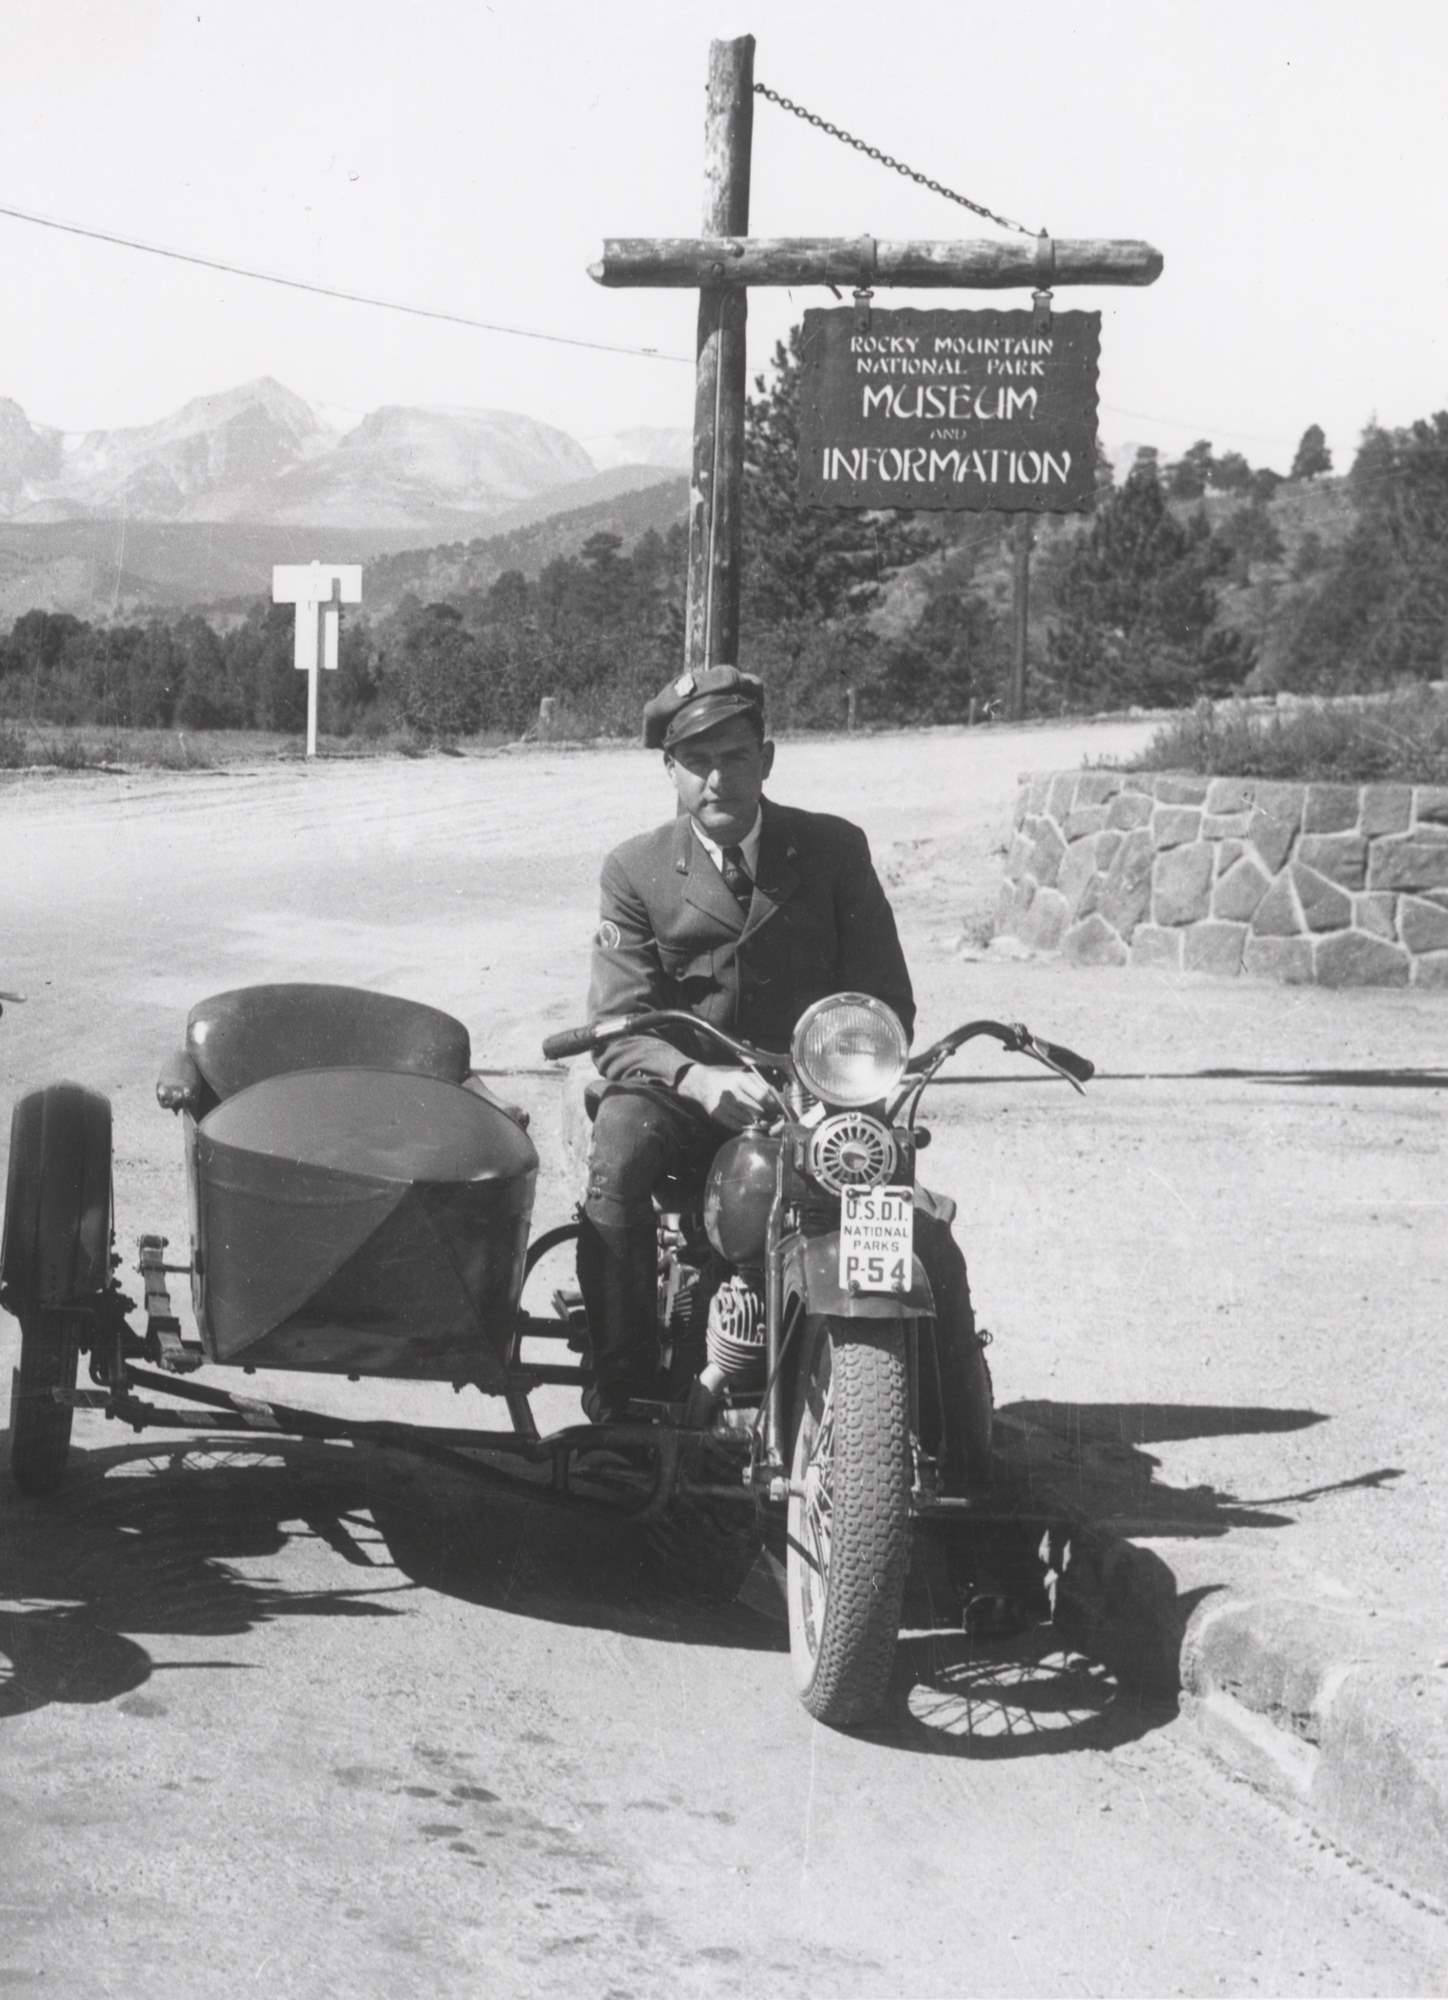 Man in NPS uniform sits astride a motorcycle with sidecar attached beneath a park sign. He wears a shield-shaped badge on his cap.